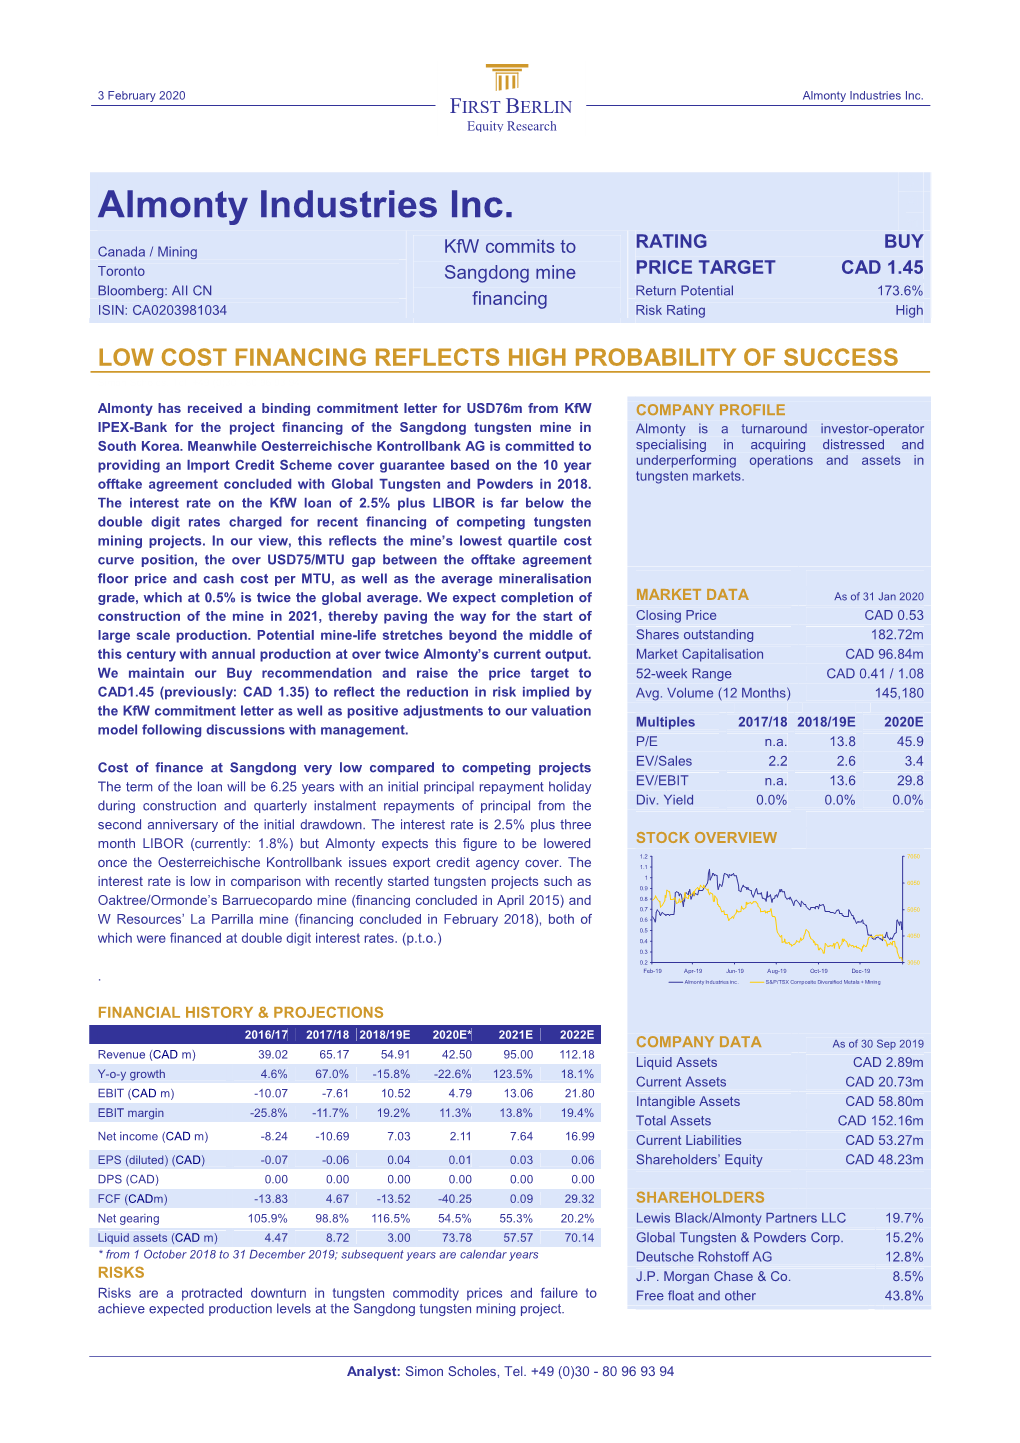 Almonty Industries Inc. FIRST BERLIN Equity Research